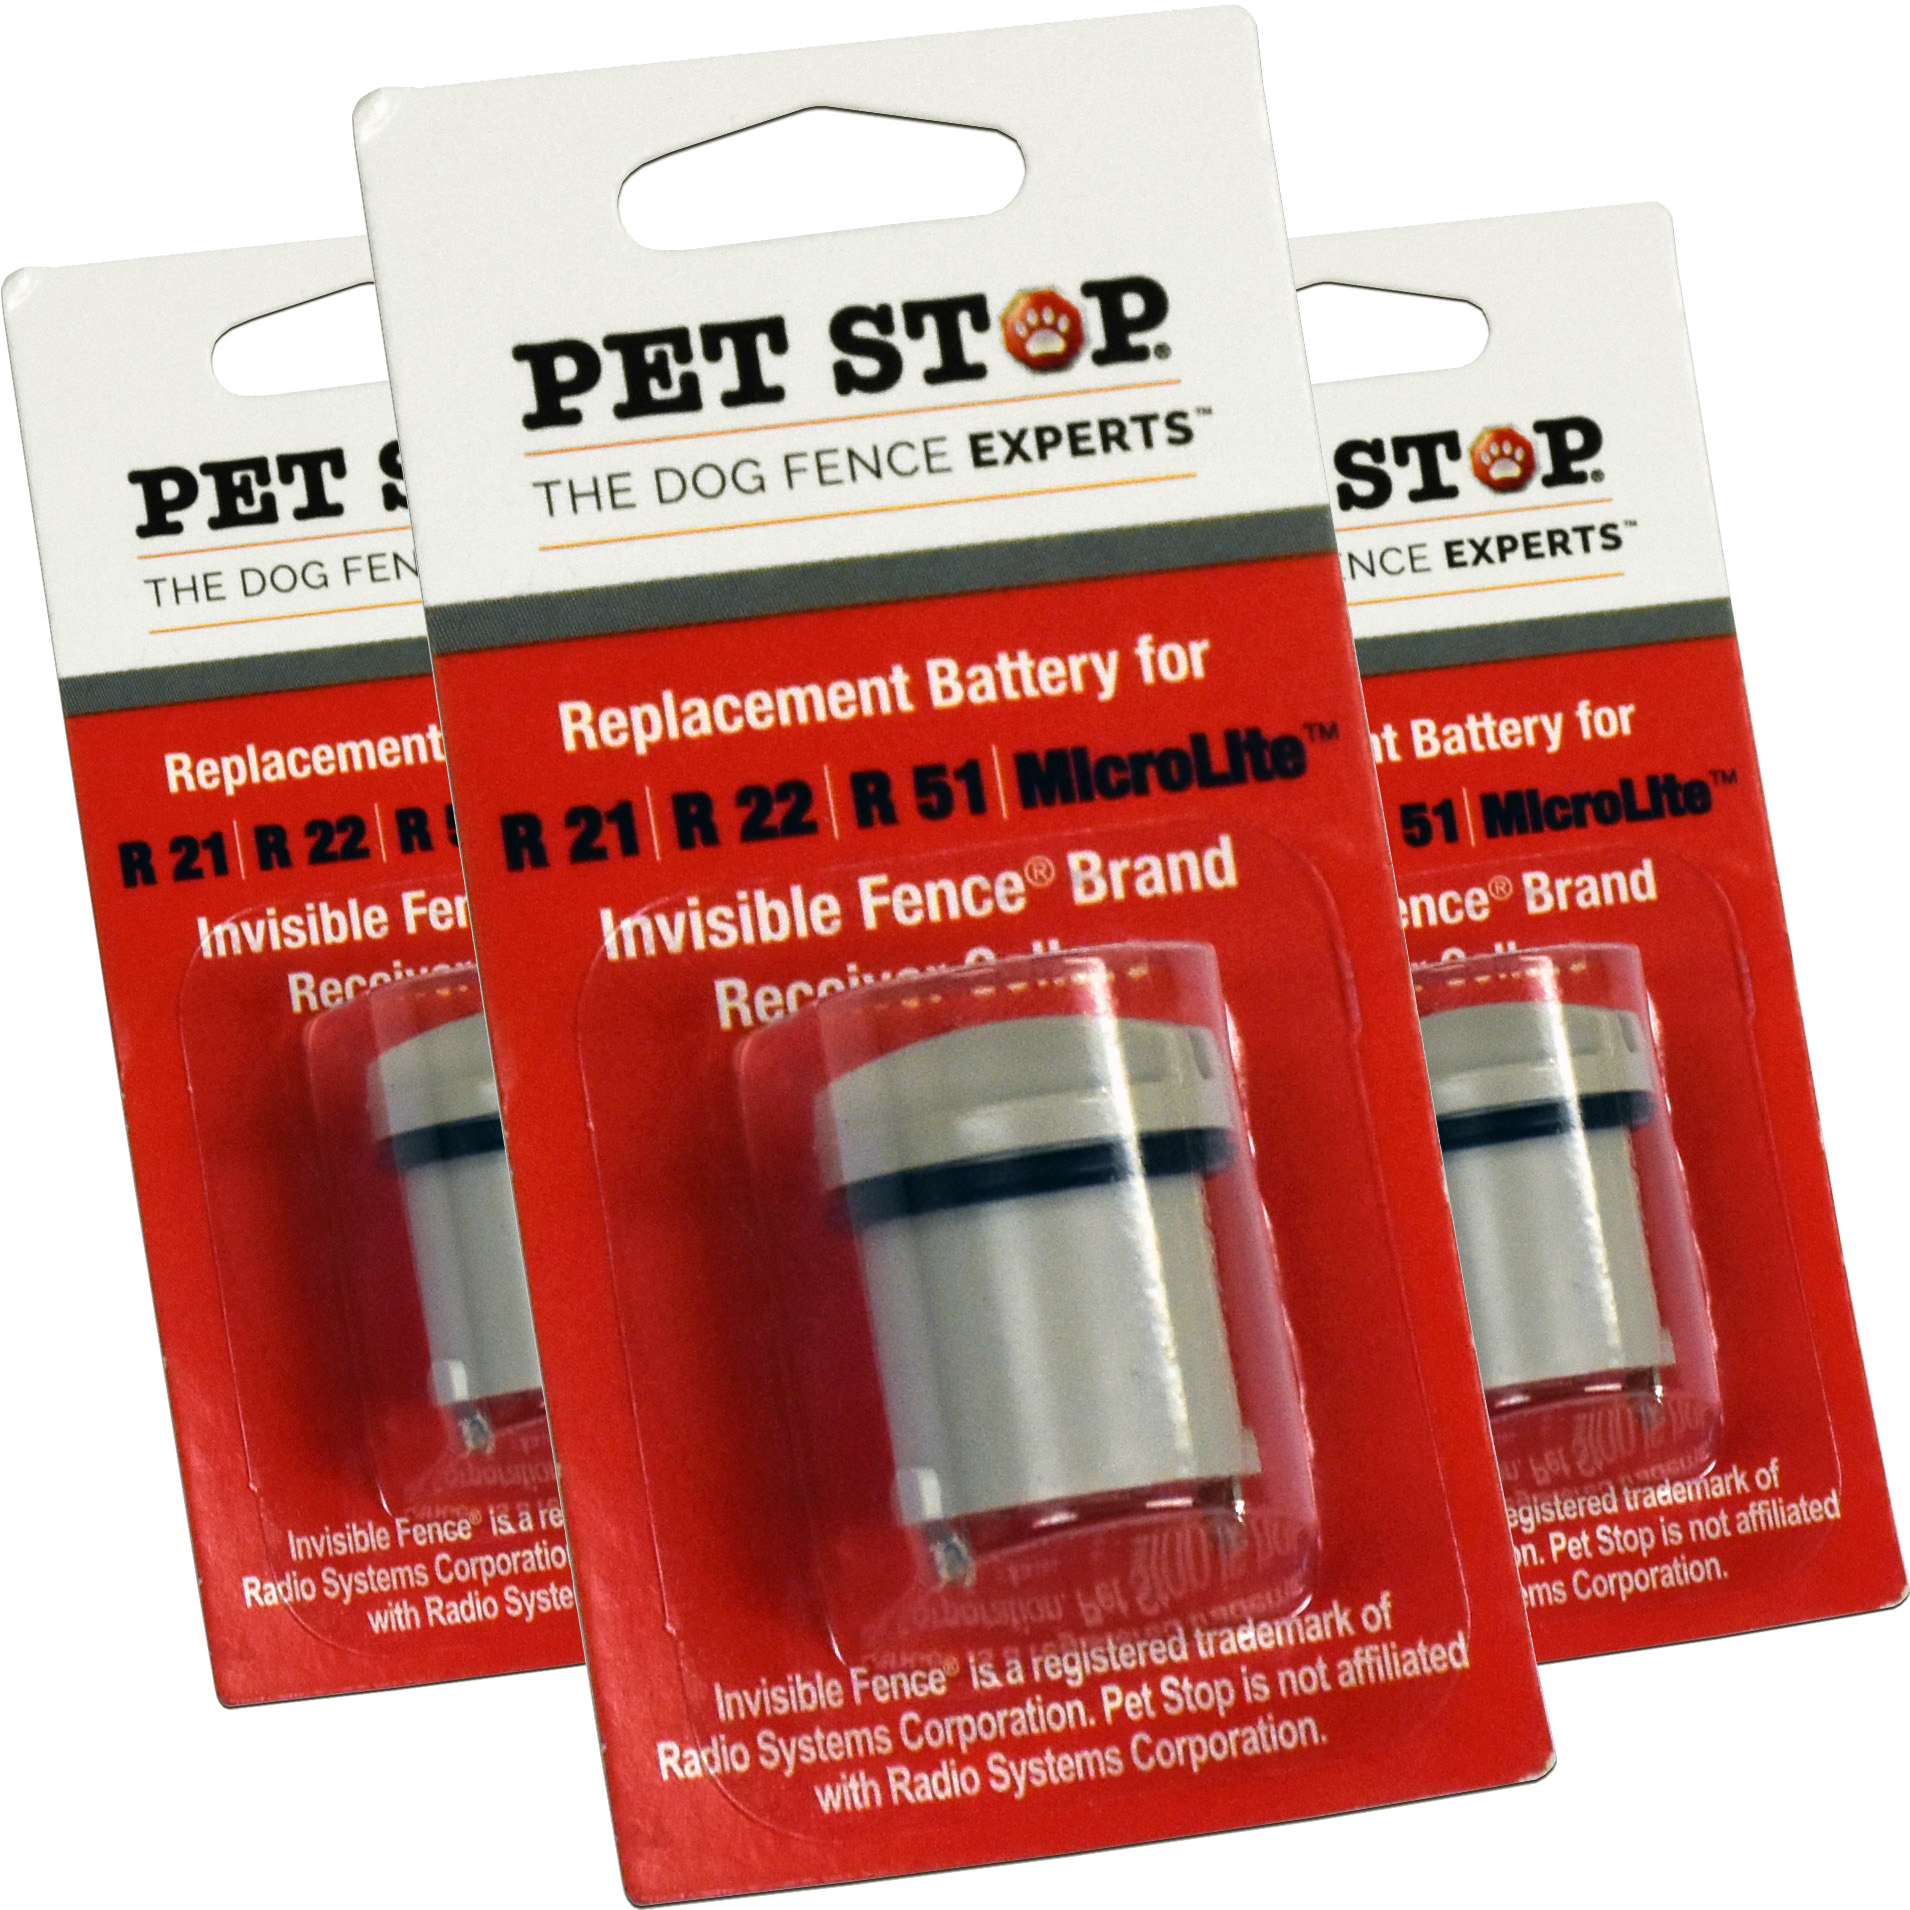 Long-lasting Batteries for Invisible Fence Brand Power Cap Unit - Pack of 3